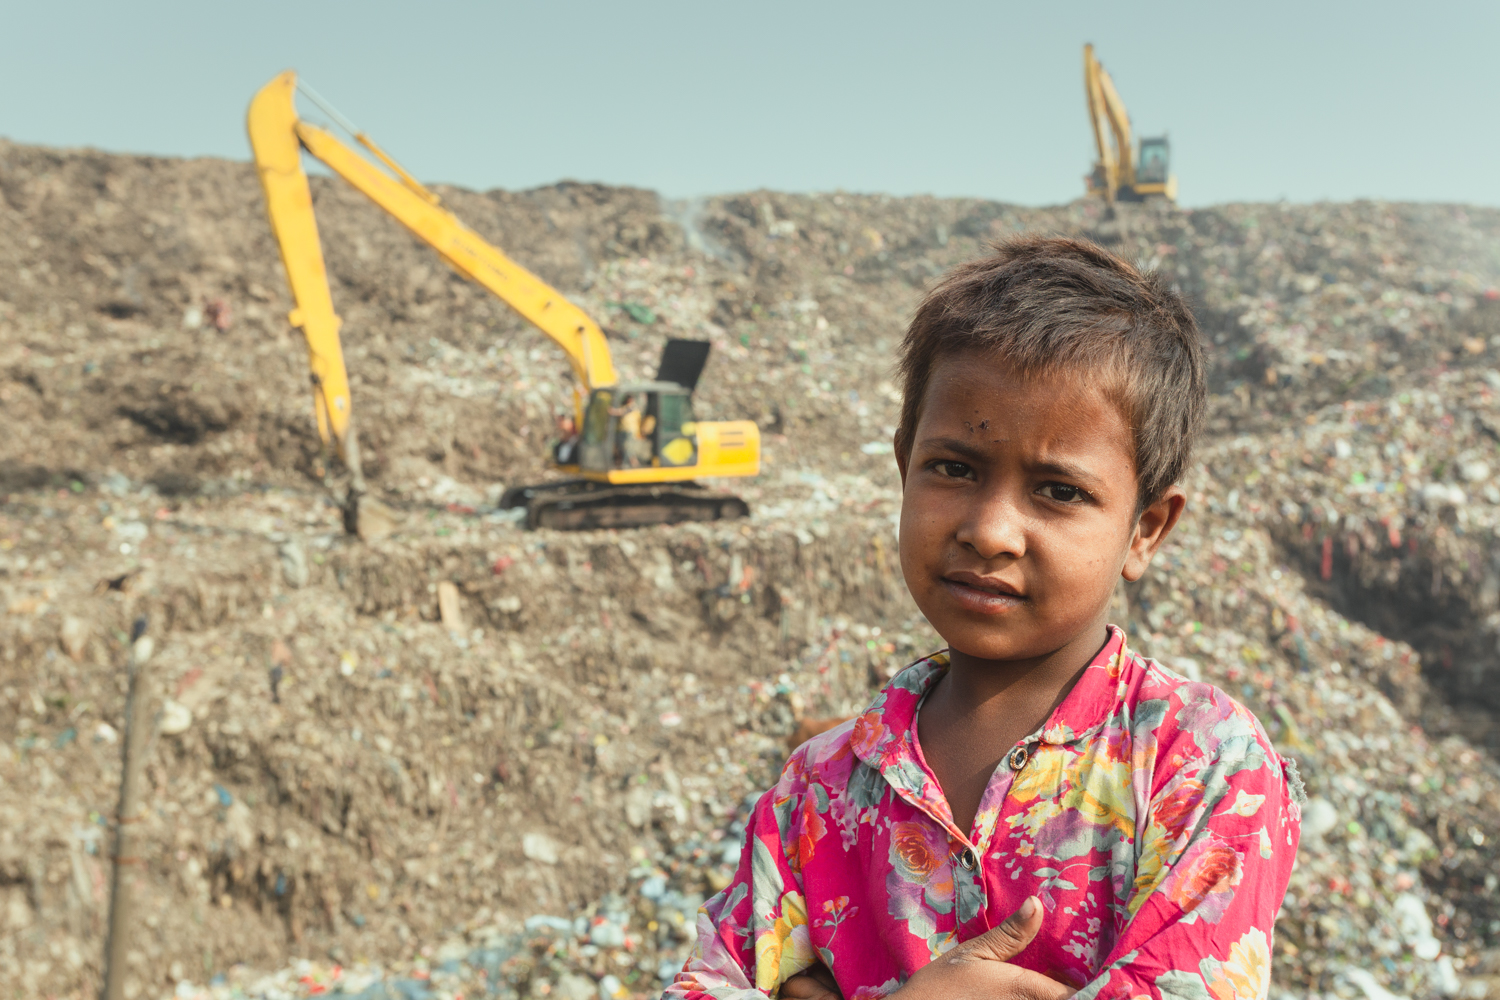 Young child in front of rubbish and equipment in Chittagong, Bangladesh.